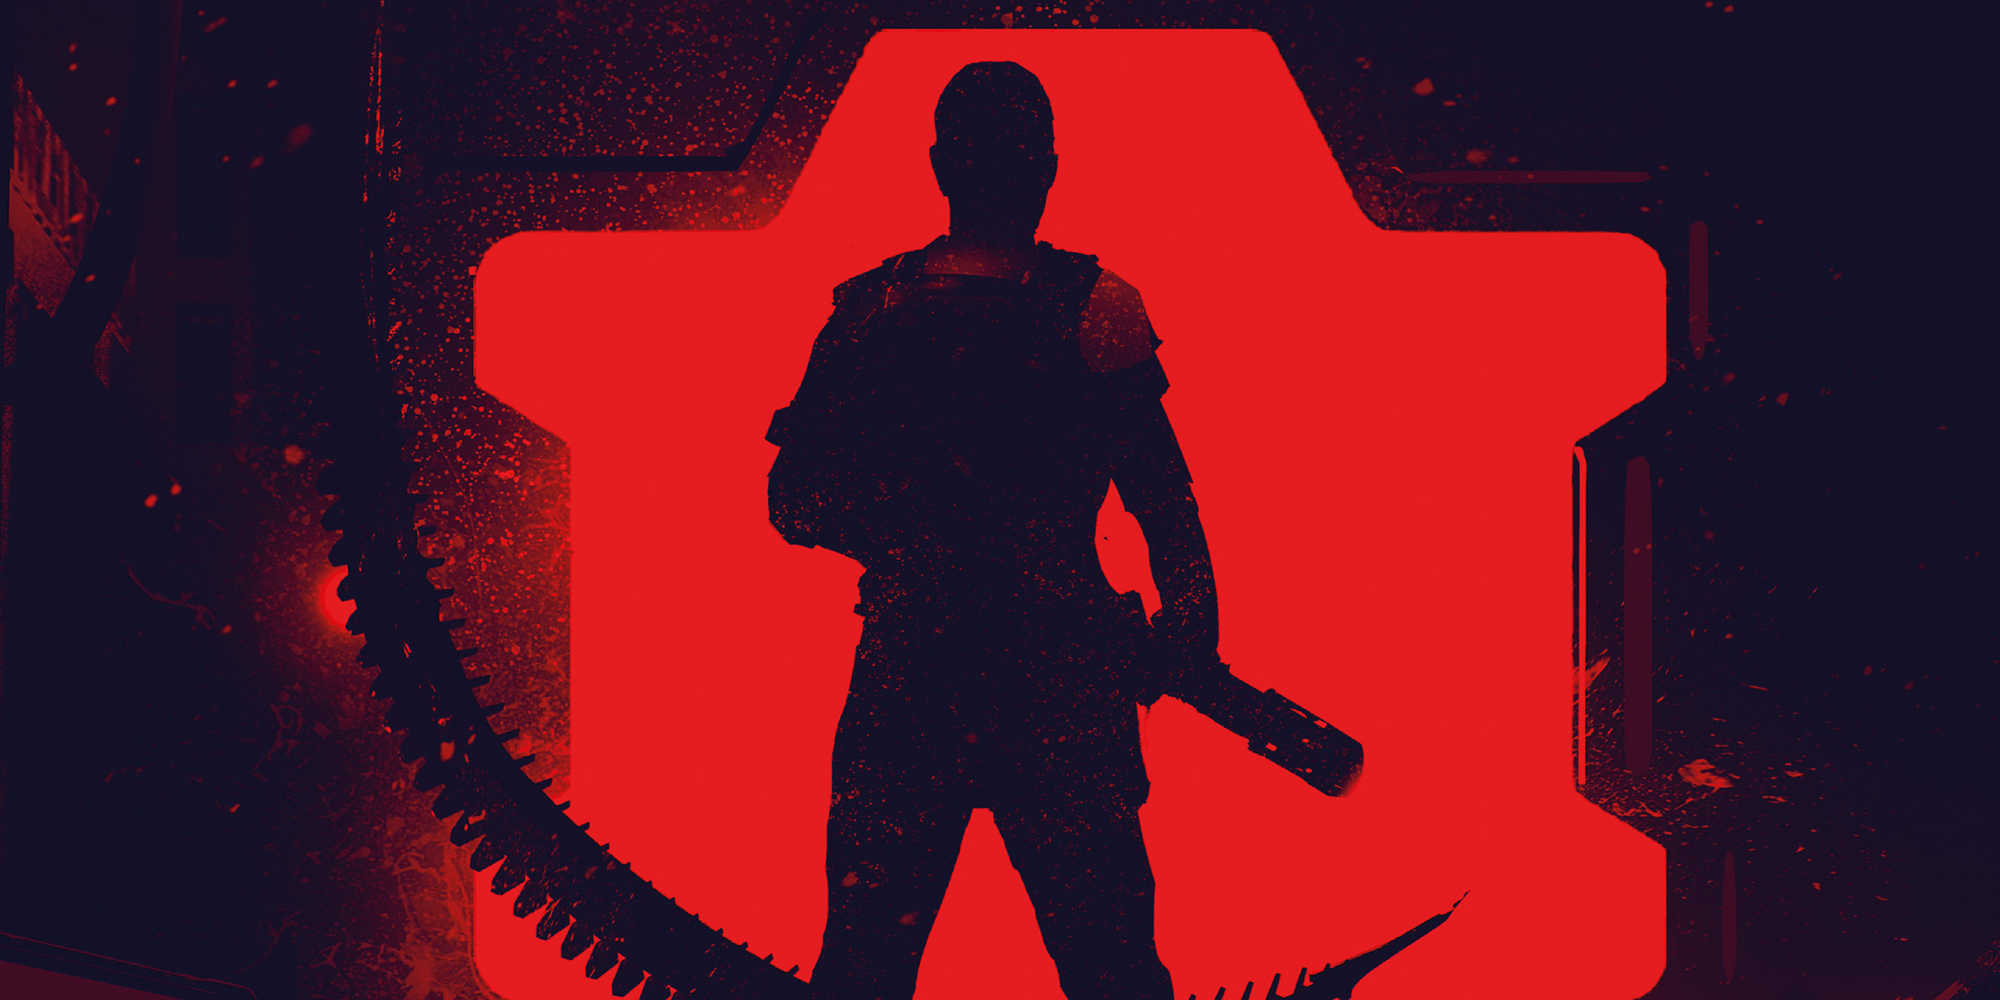 A silhouette of a space marine from the Alien RPG; there is a red tint and a hint of a xenomorph tail can be seen.